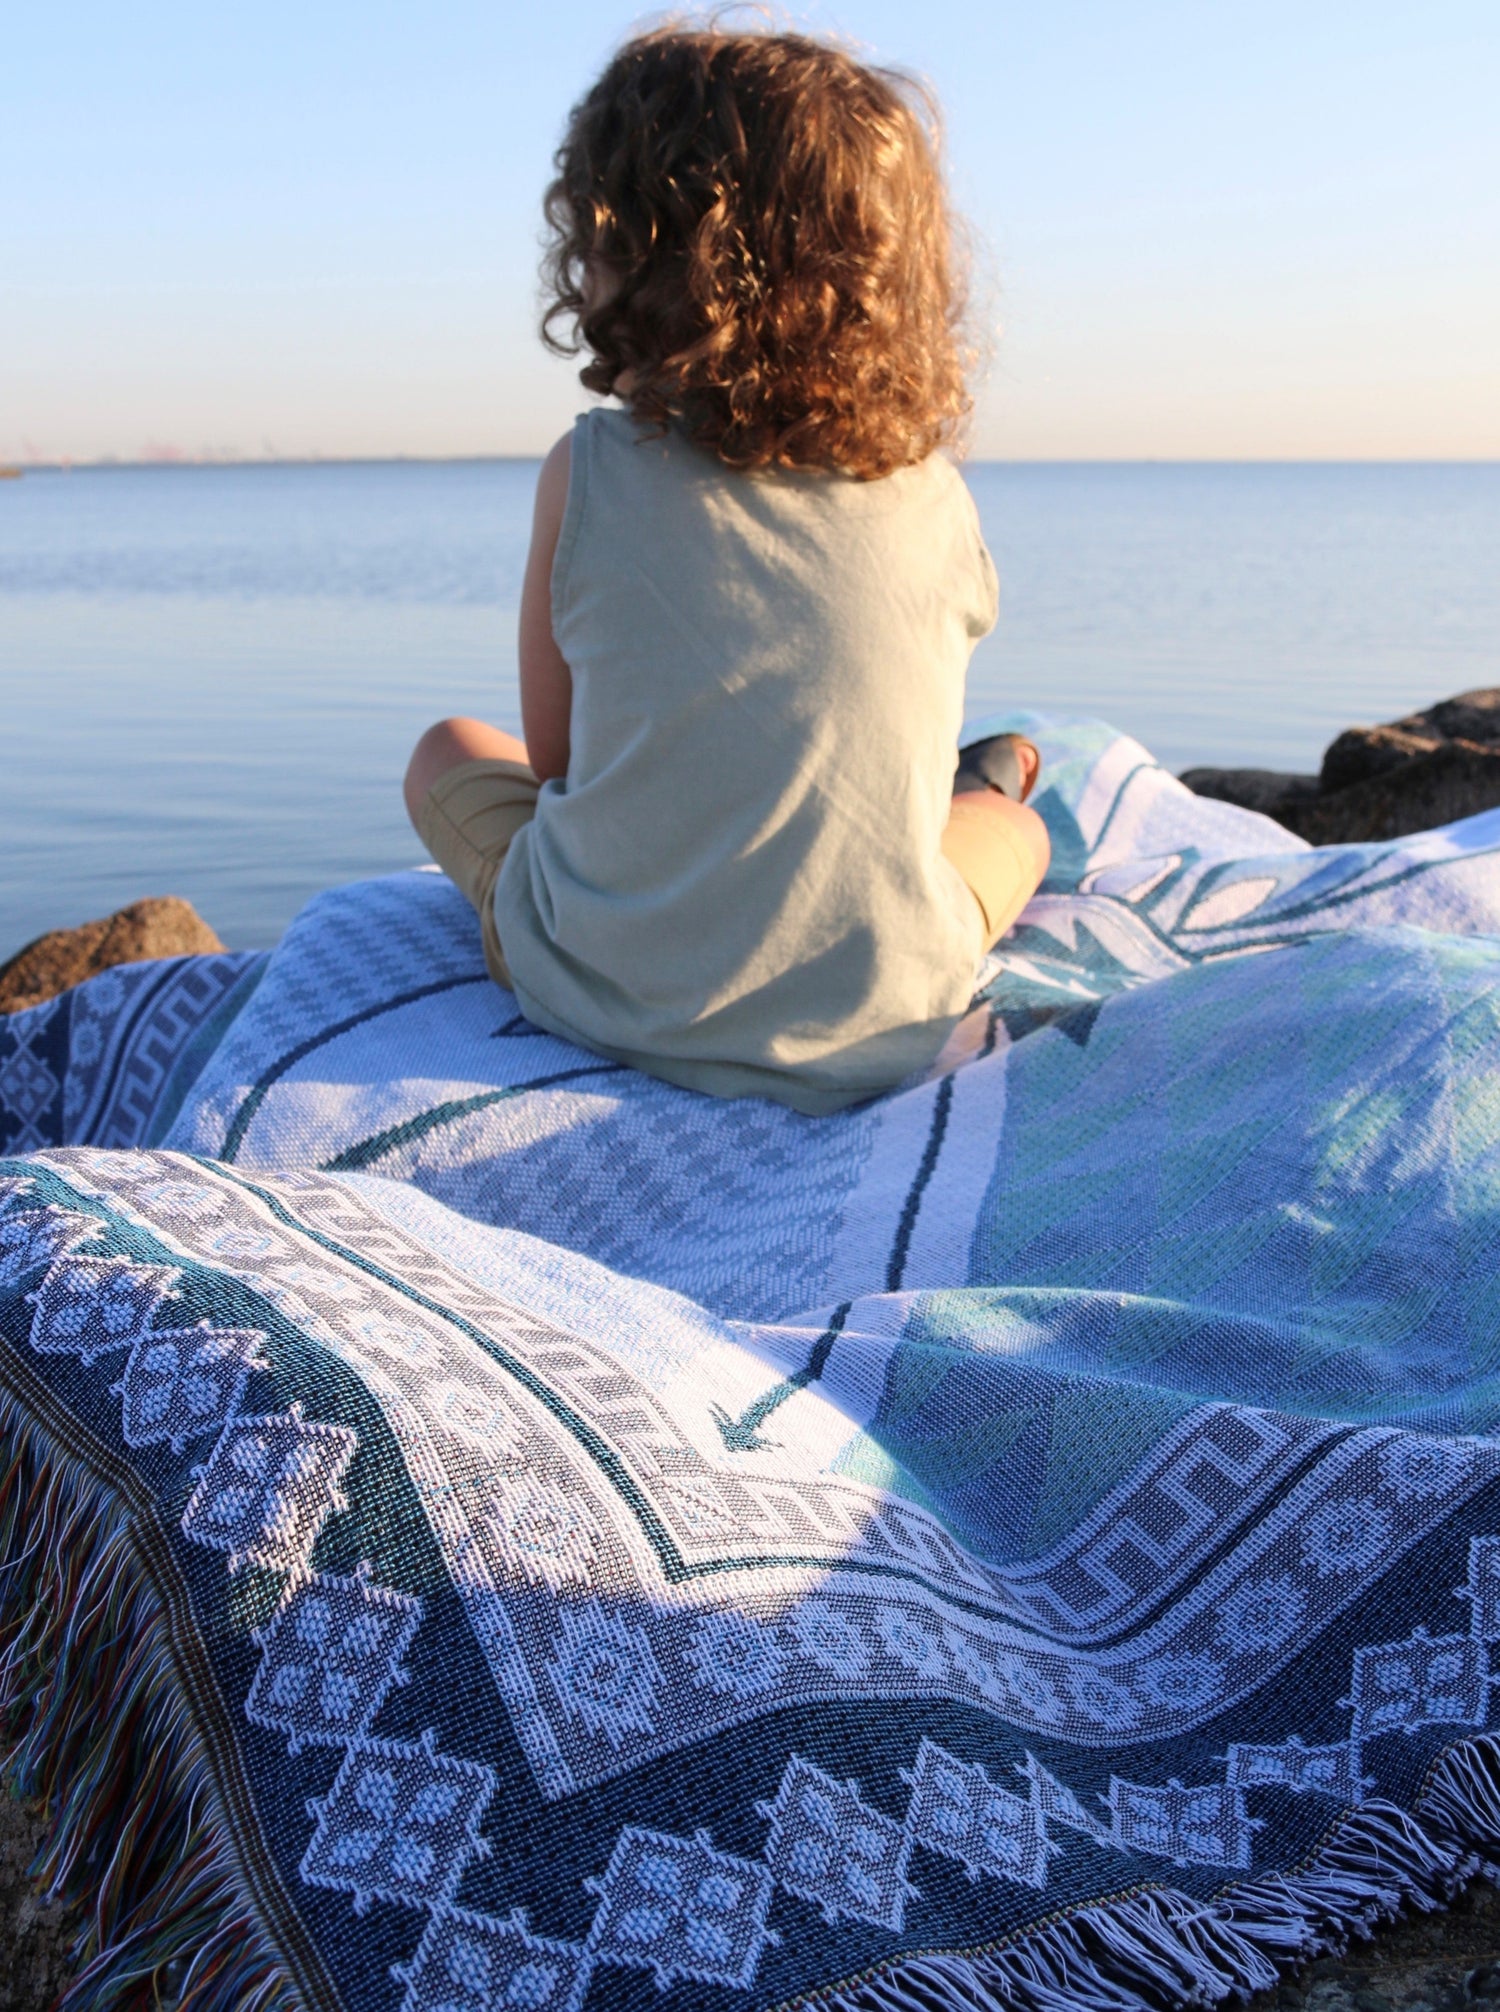 Shooting Stars blue throw rug, picnic blanket laying on rocks overlooking ocean. Quality family time. Designed in Aus.